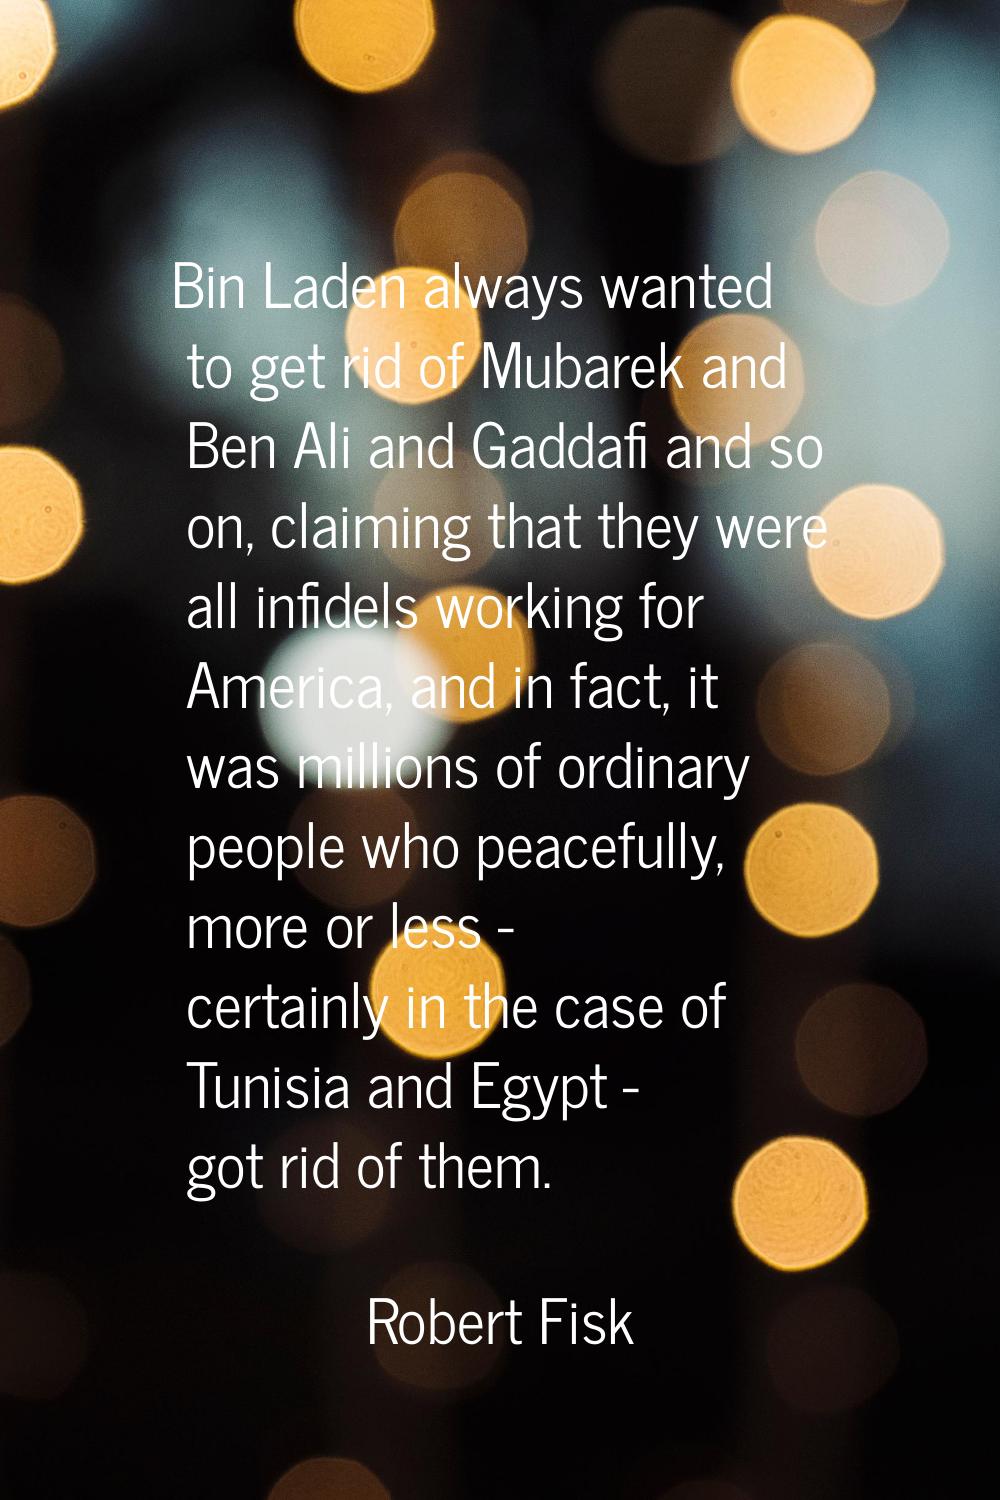 Bin Laden always wanted to get rid of Mubarek and Ben Ali and Gaddafi and so on, claiming that they